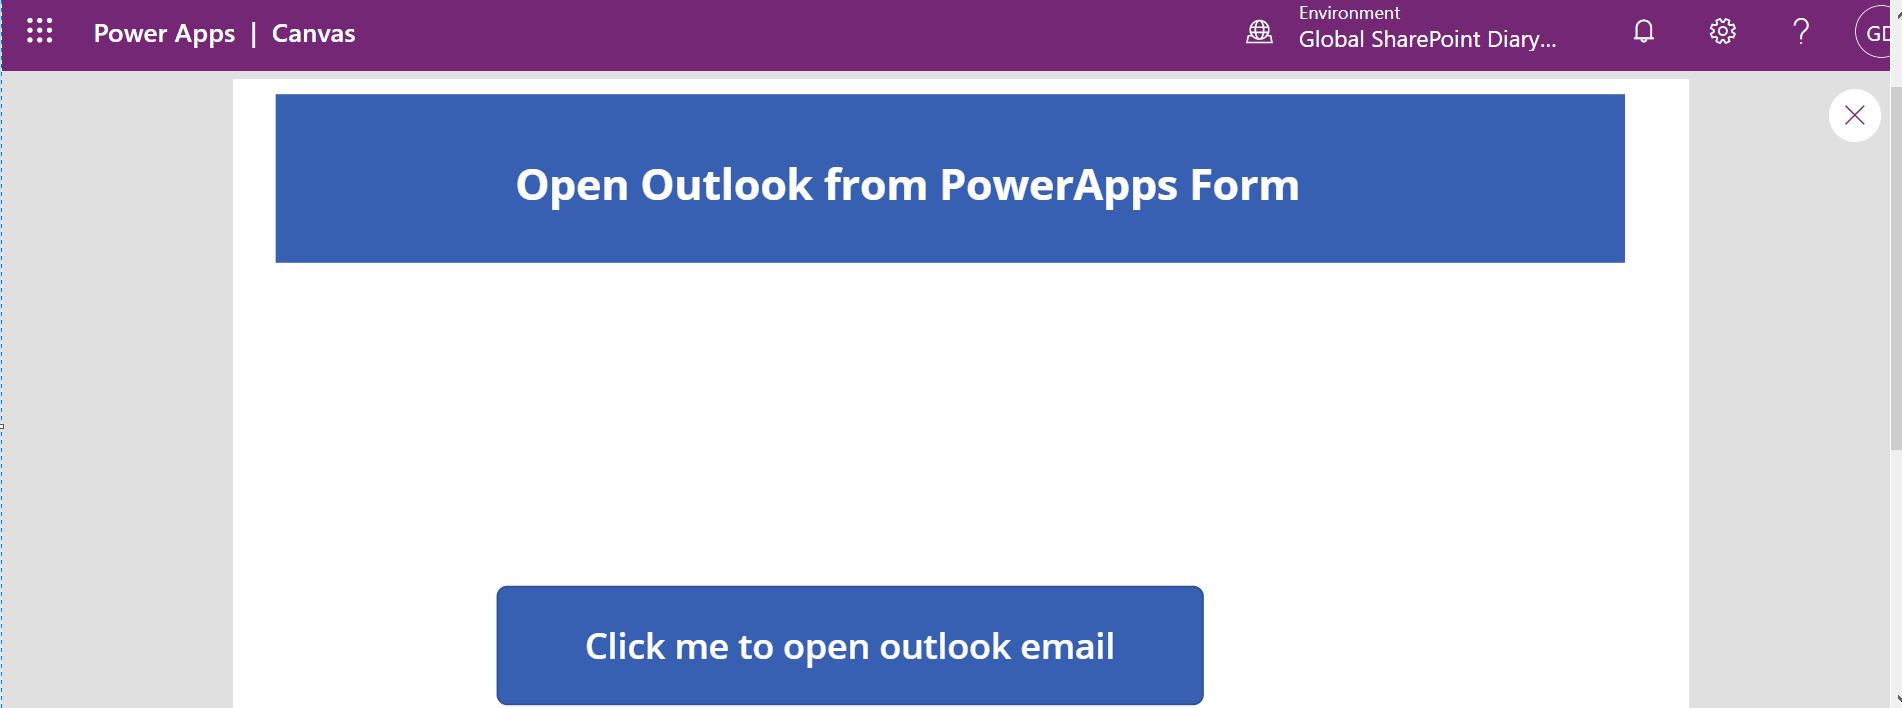 Preview the open outlook form from PowerApps